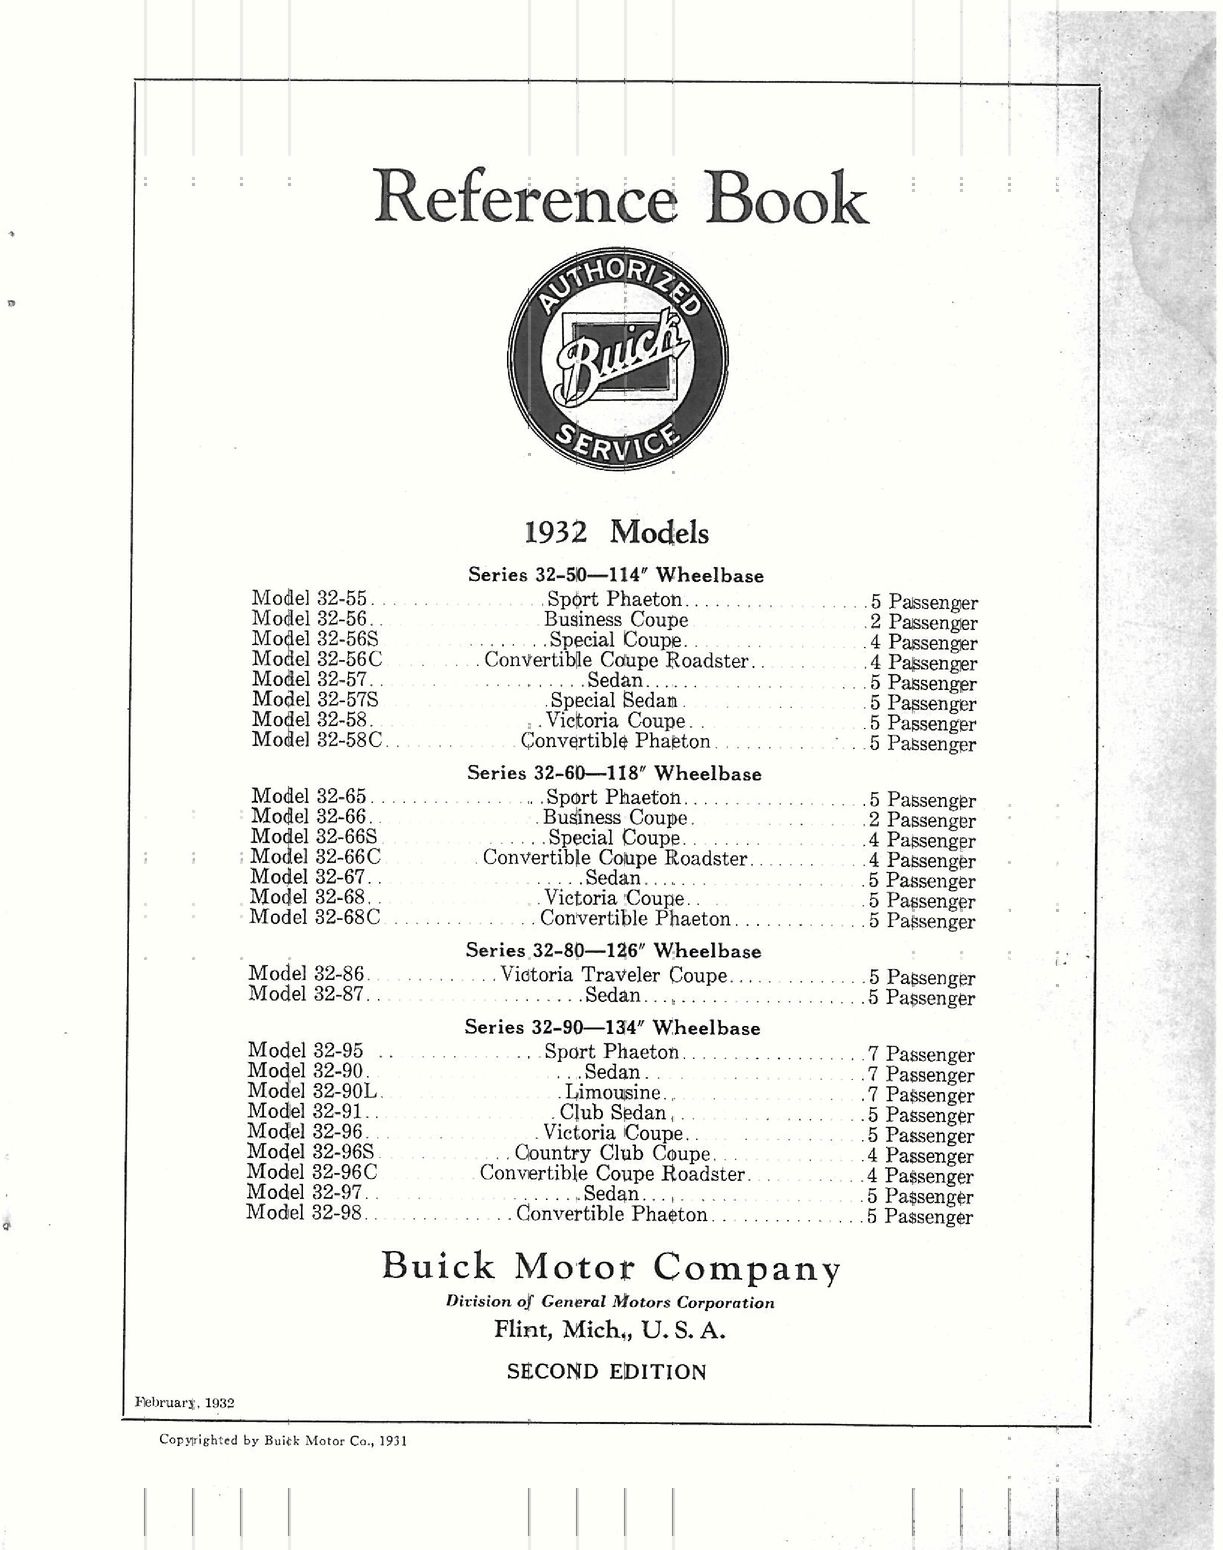 1932 Buick Reference Book-01